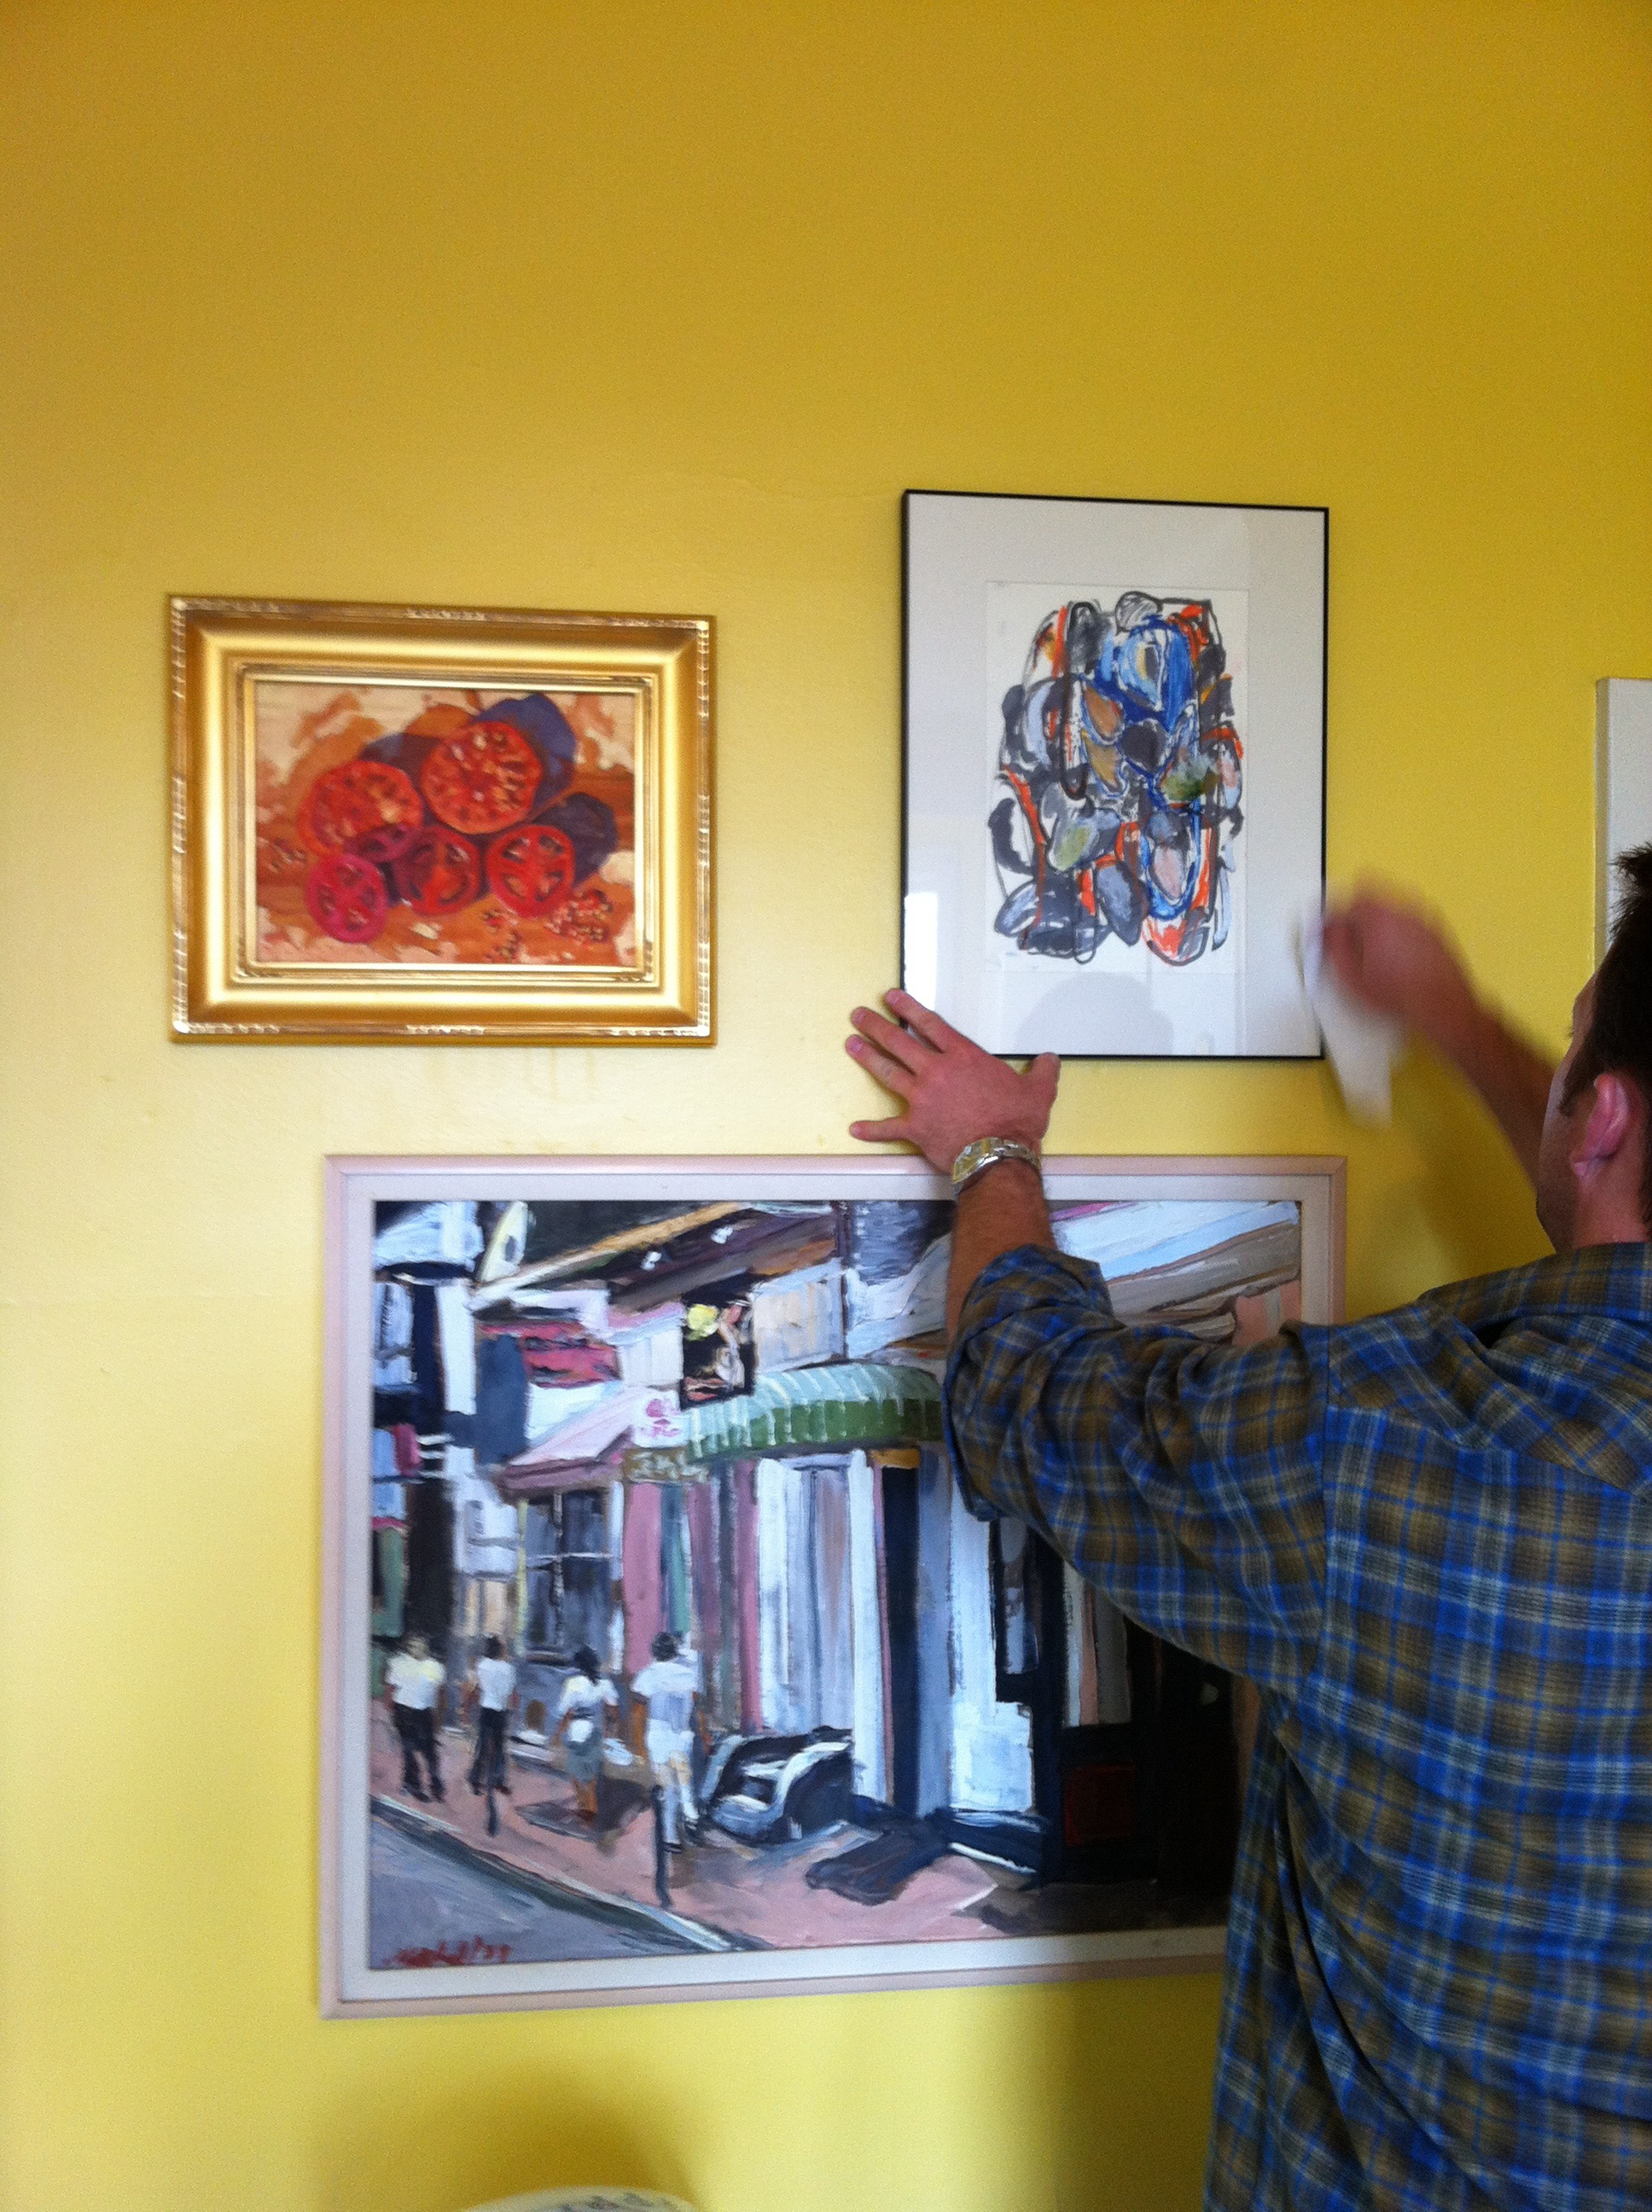 Here my brother hangs Hoshino's Oyster's next to Ziemienski's Tomatoes...above a New Orleans scene Dean bought from an unknown street artist.